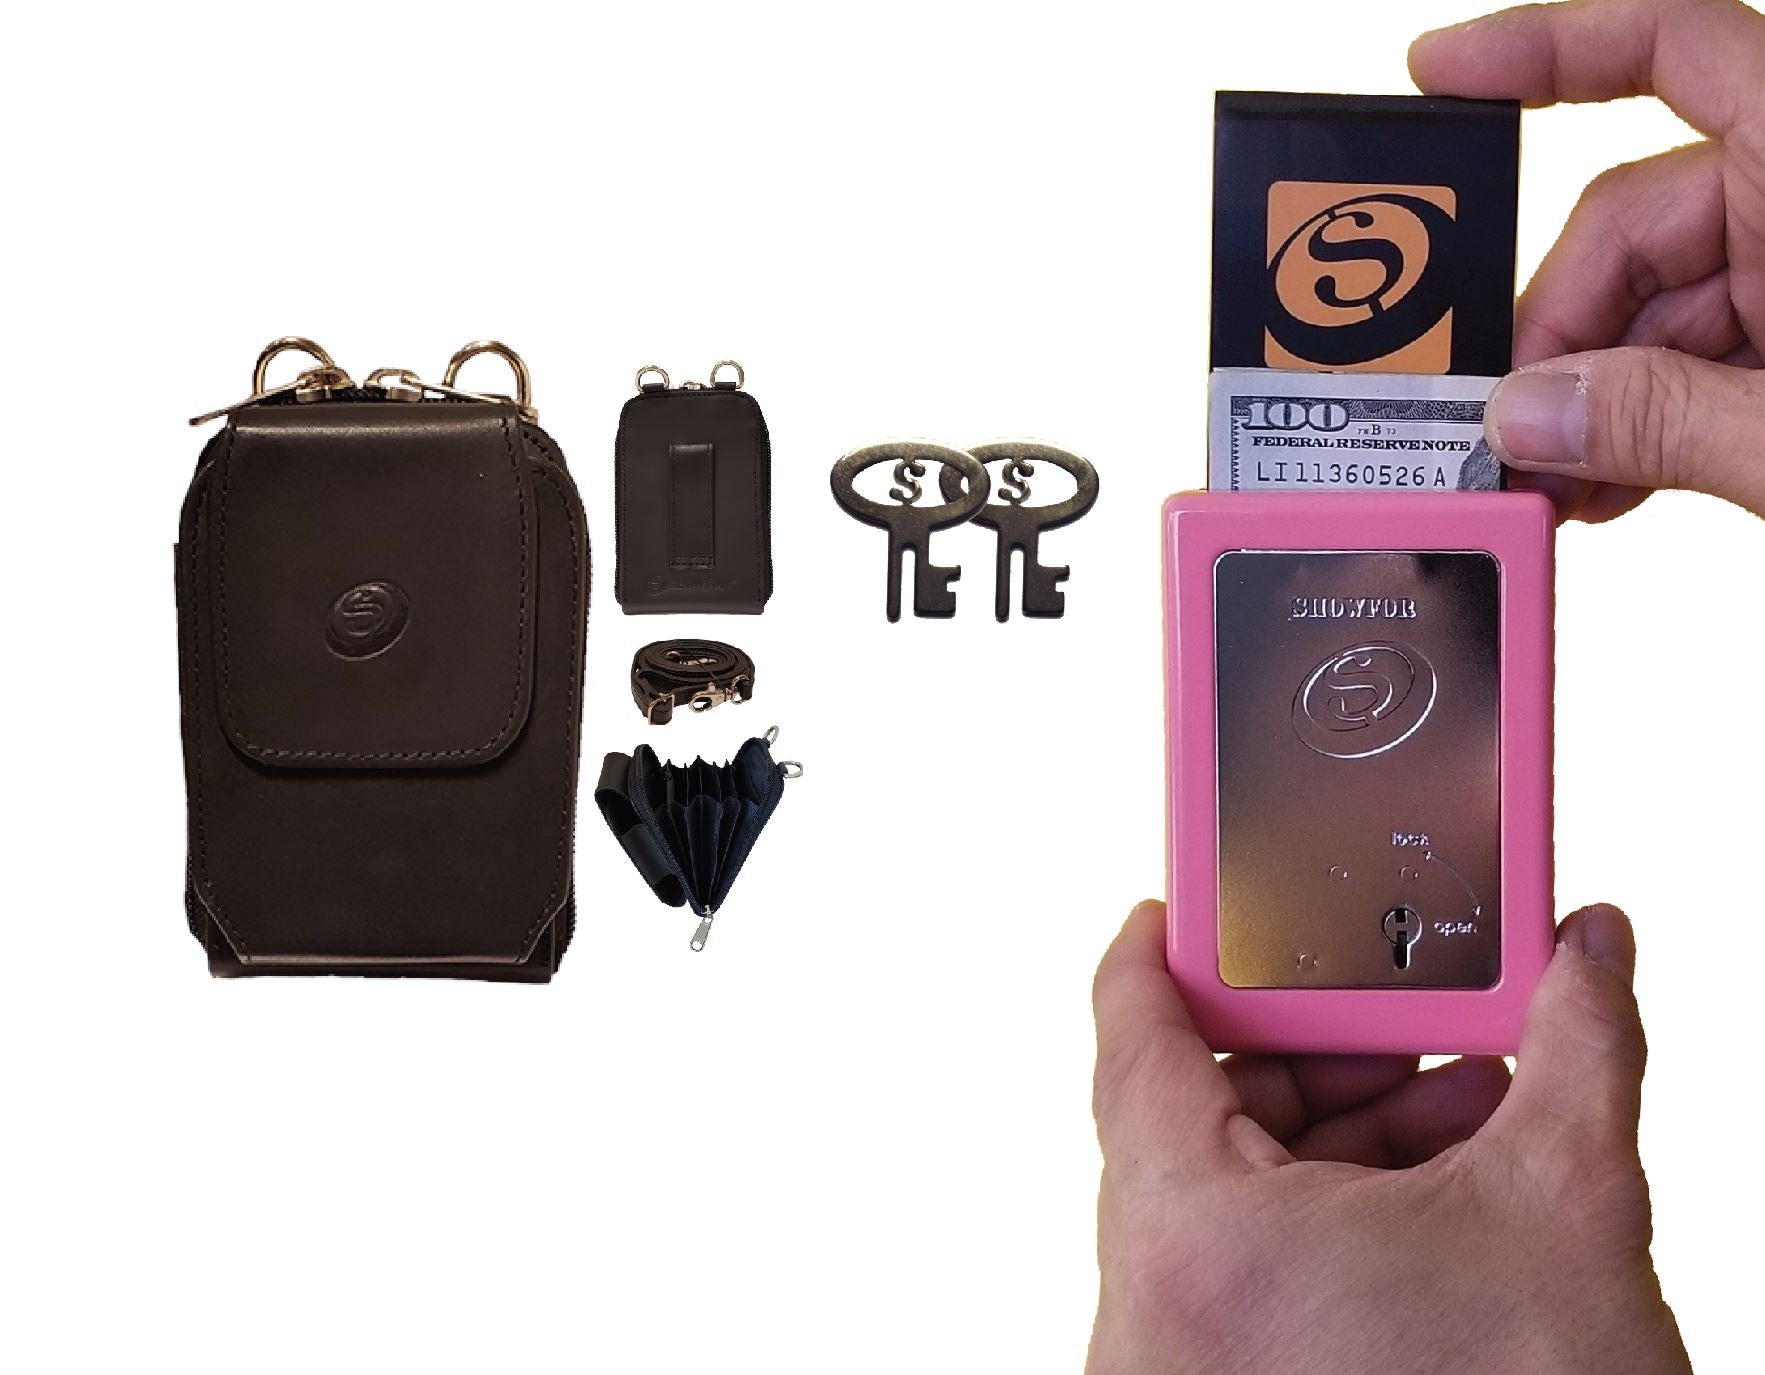 The Showfor Pink Winners Bank with Black Leather Case bundle, a fusion of sophistication and utility.